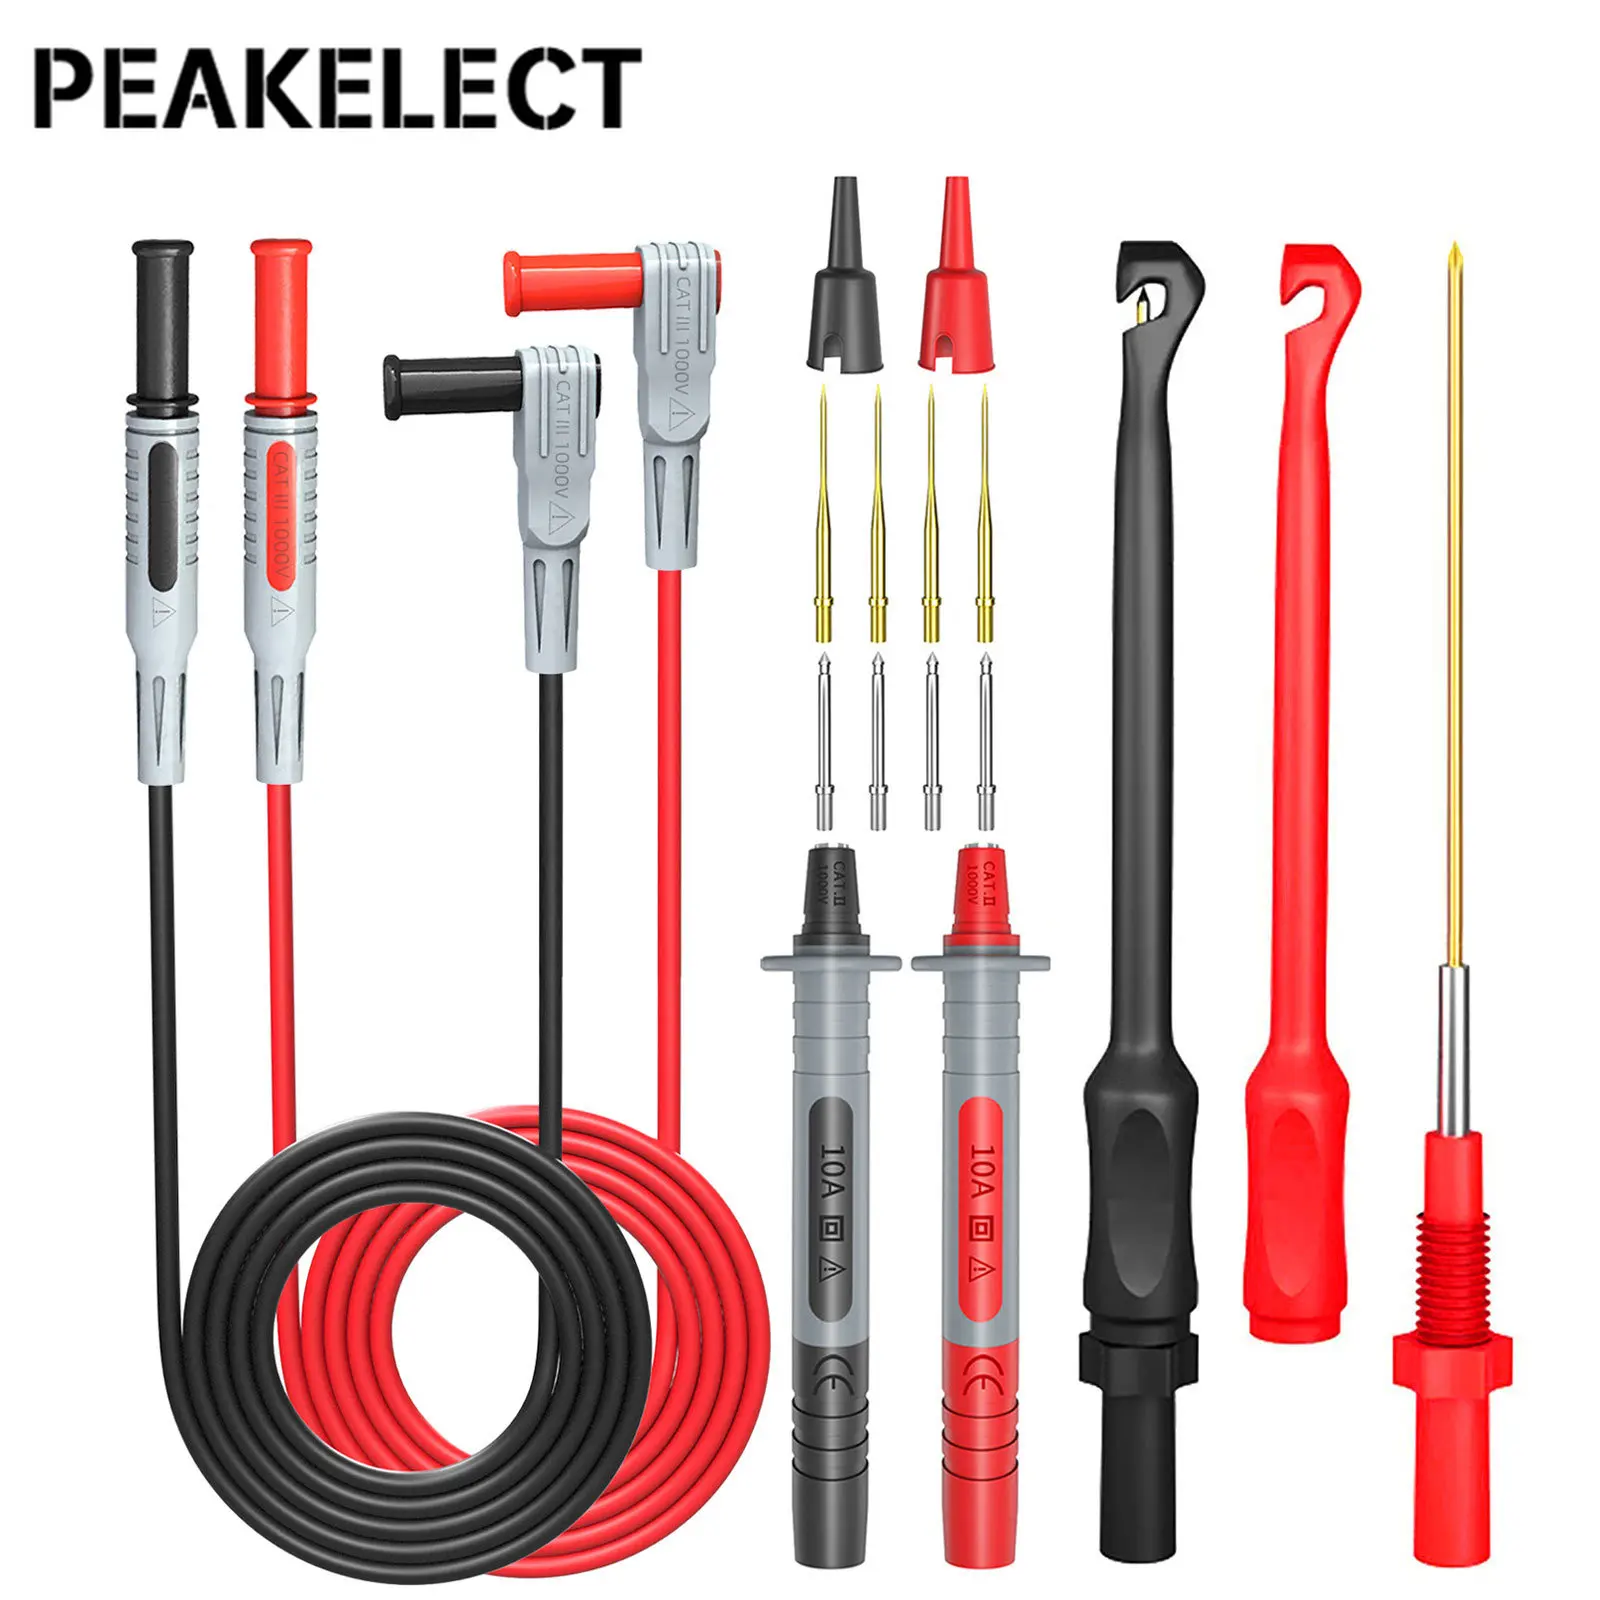 Peakelect P1033B Multimeter Test Probes Leads Kit with Wire Piercing Puncture 4mm Banana Plug Test Leads Test Probes 2pcs 20a 1000v multimeter test leads cable leads kit test probes silicone cable suitable for universal multimeter